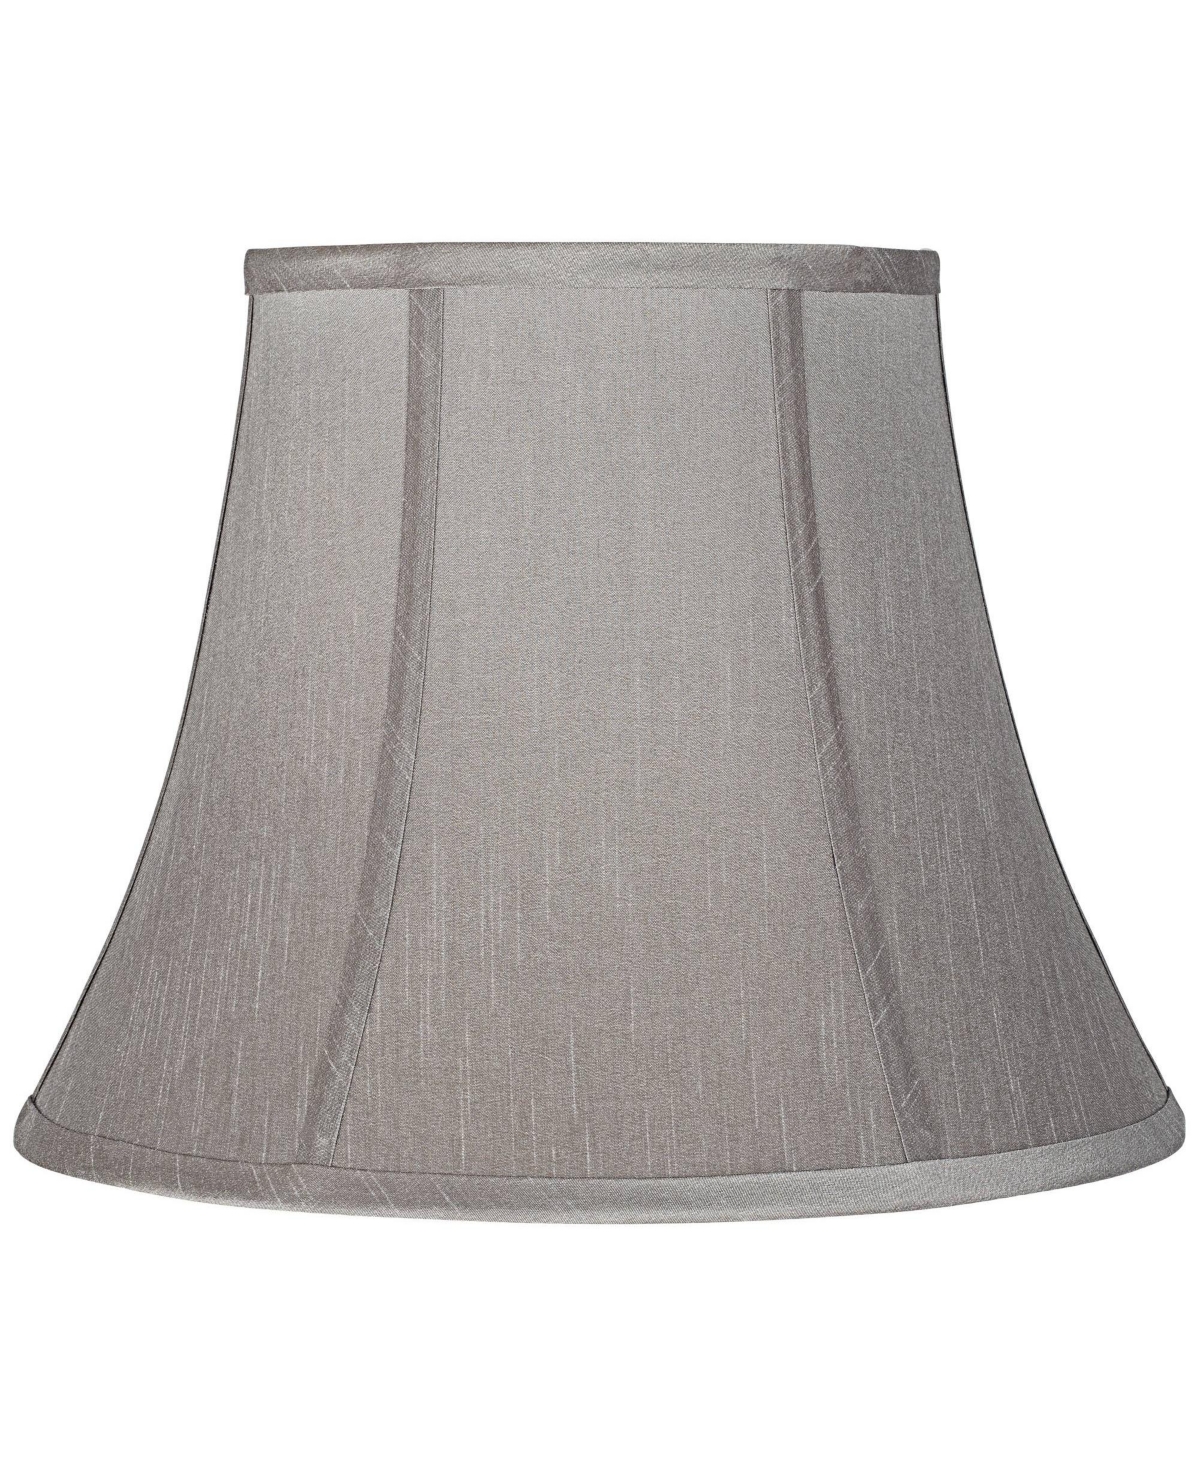 Springcrest Pewter Gray Medium Bell Lamp Shade 8" Top X 14" Bottom X 11" Slant X 10.5" High (spider) Replacement In Grey